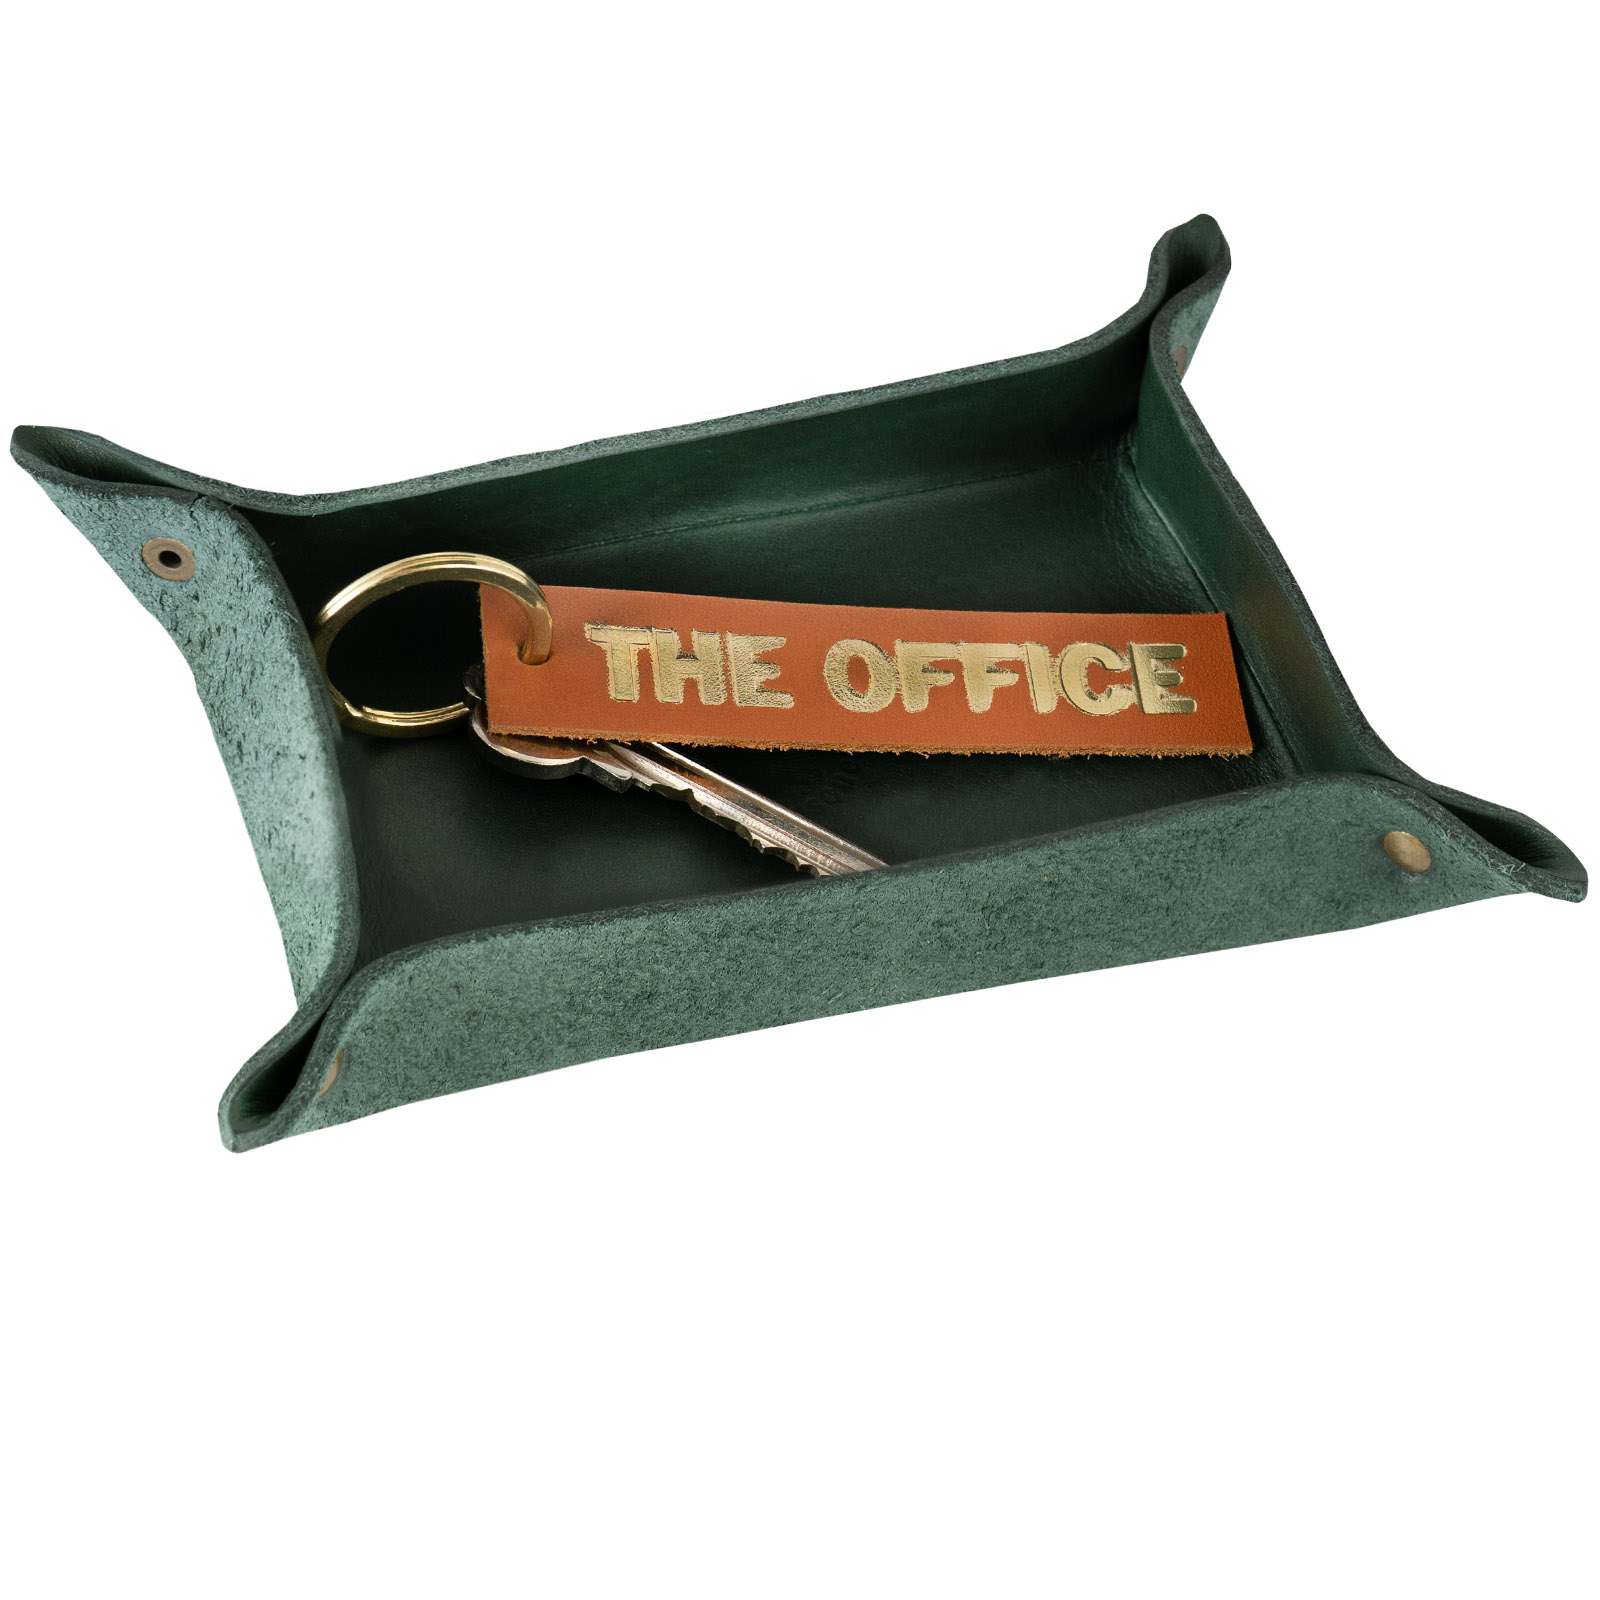 Leather tray green